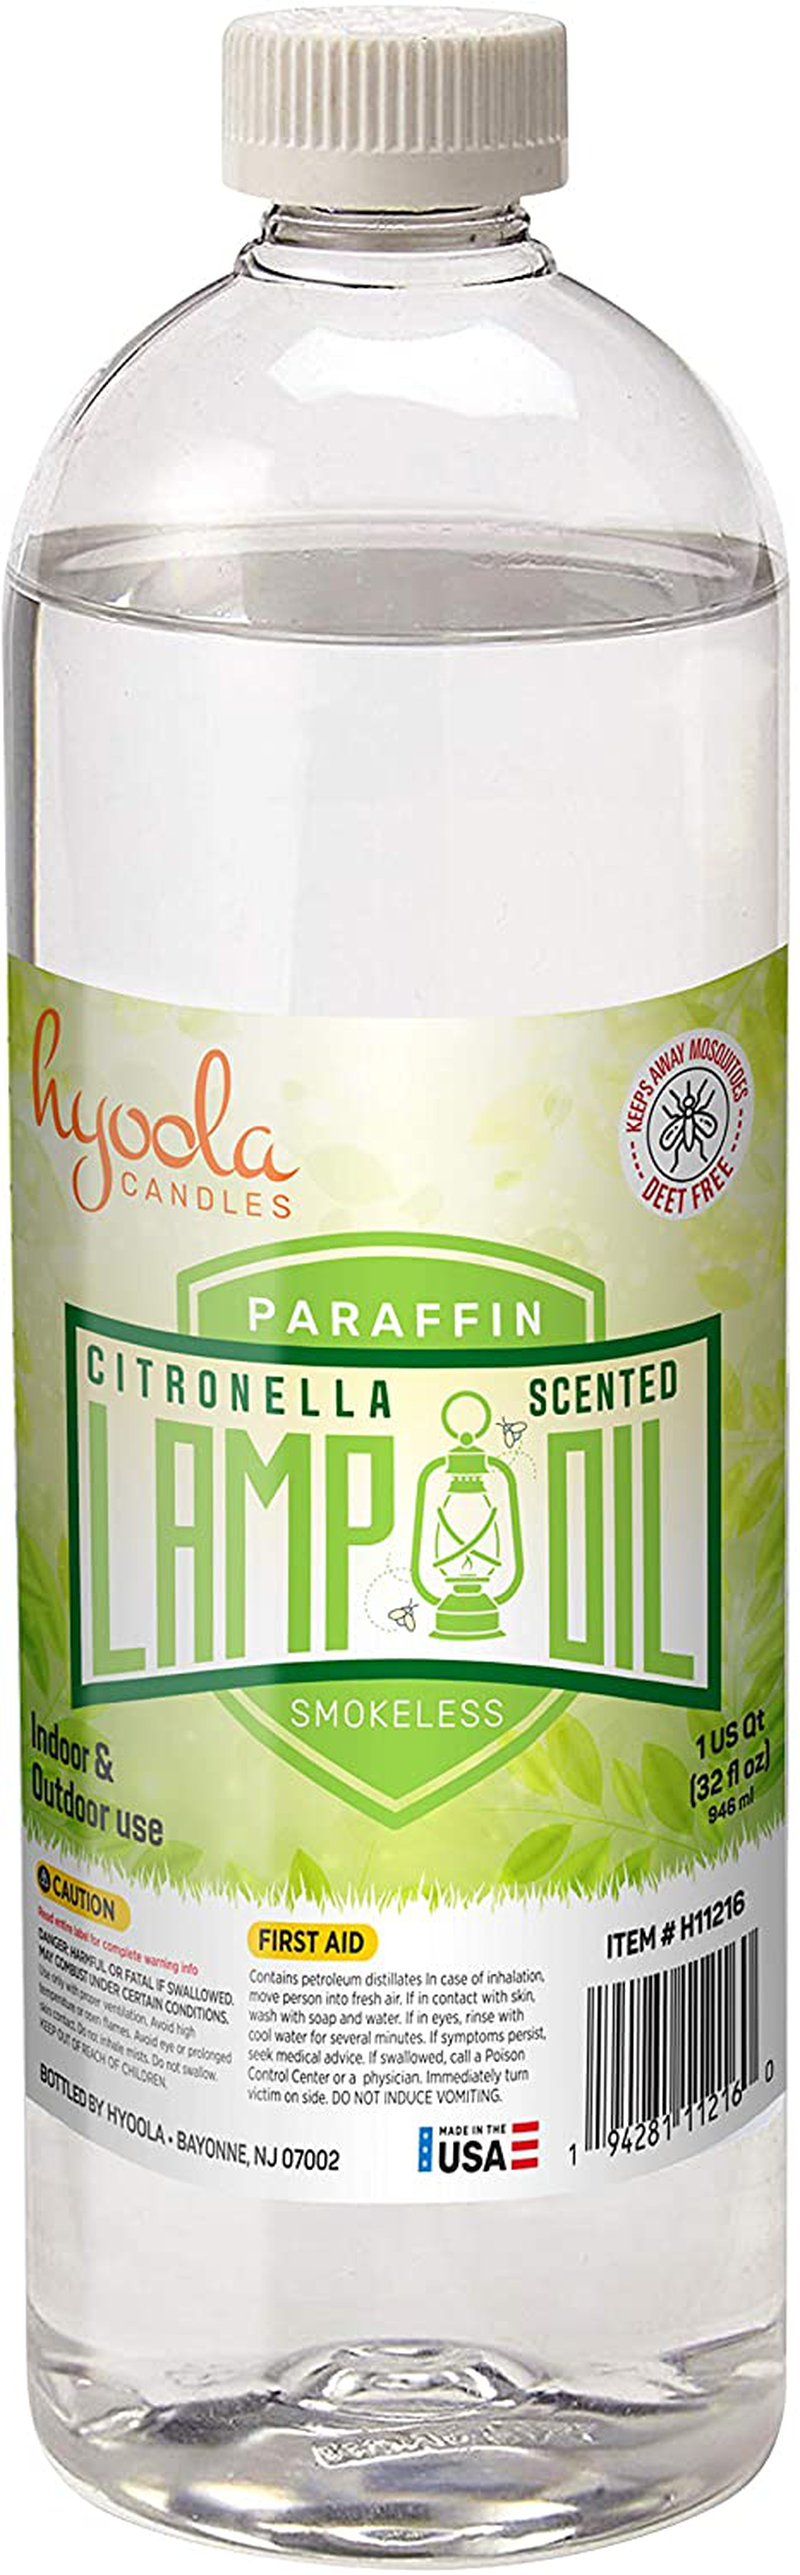 Citronella Lamp Oil, 1 Gallon - Smokeless Insect and Mosquito Repellent Scented Paraffin Fluid for Indoor and Outdoor Lamp, Lantern and Oil Candle Use - by Hyoola Home & Garden > Lighting Accessories > Oil Lamp Fuel Hyoola 32 Ounces  